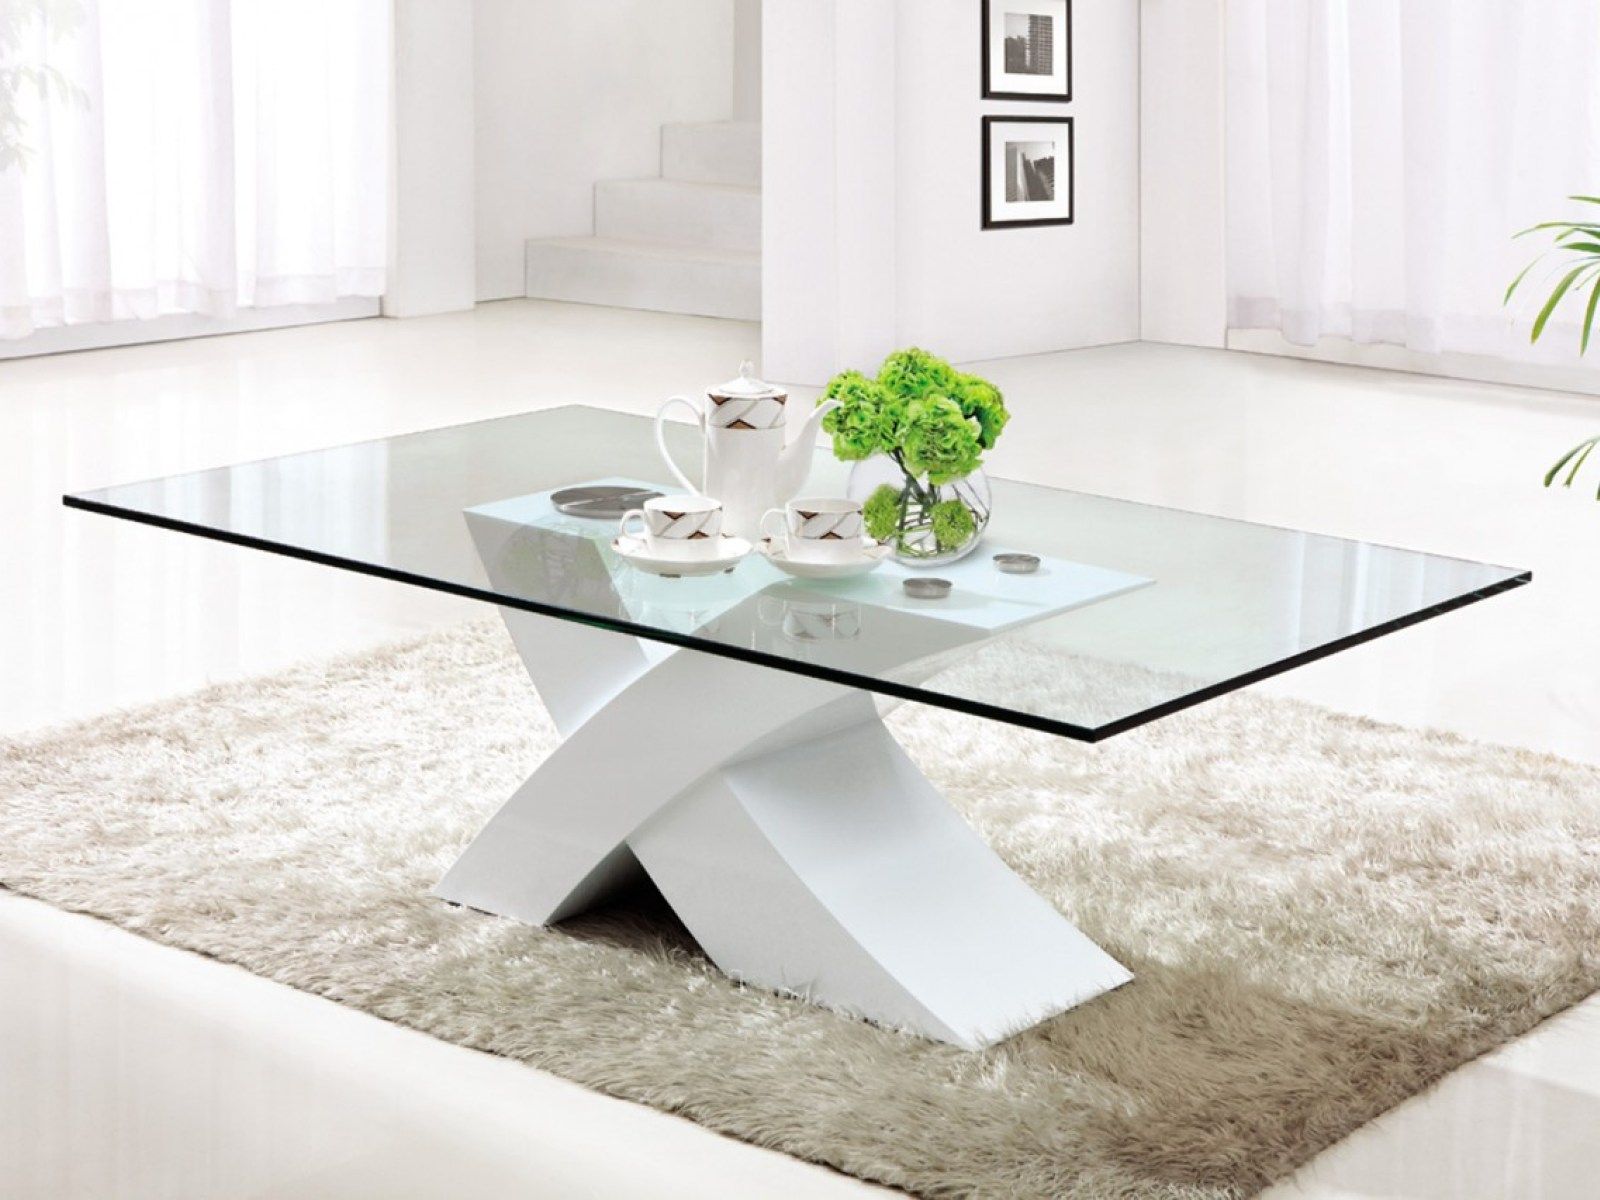 Popular Clear Acrylic Coffee Tables Intended For Clear Acrylic Coffee Table Ikea – Listerby Brown Coffee Table 140x60 Cm (View 8 of 10)